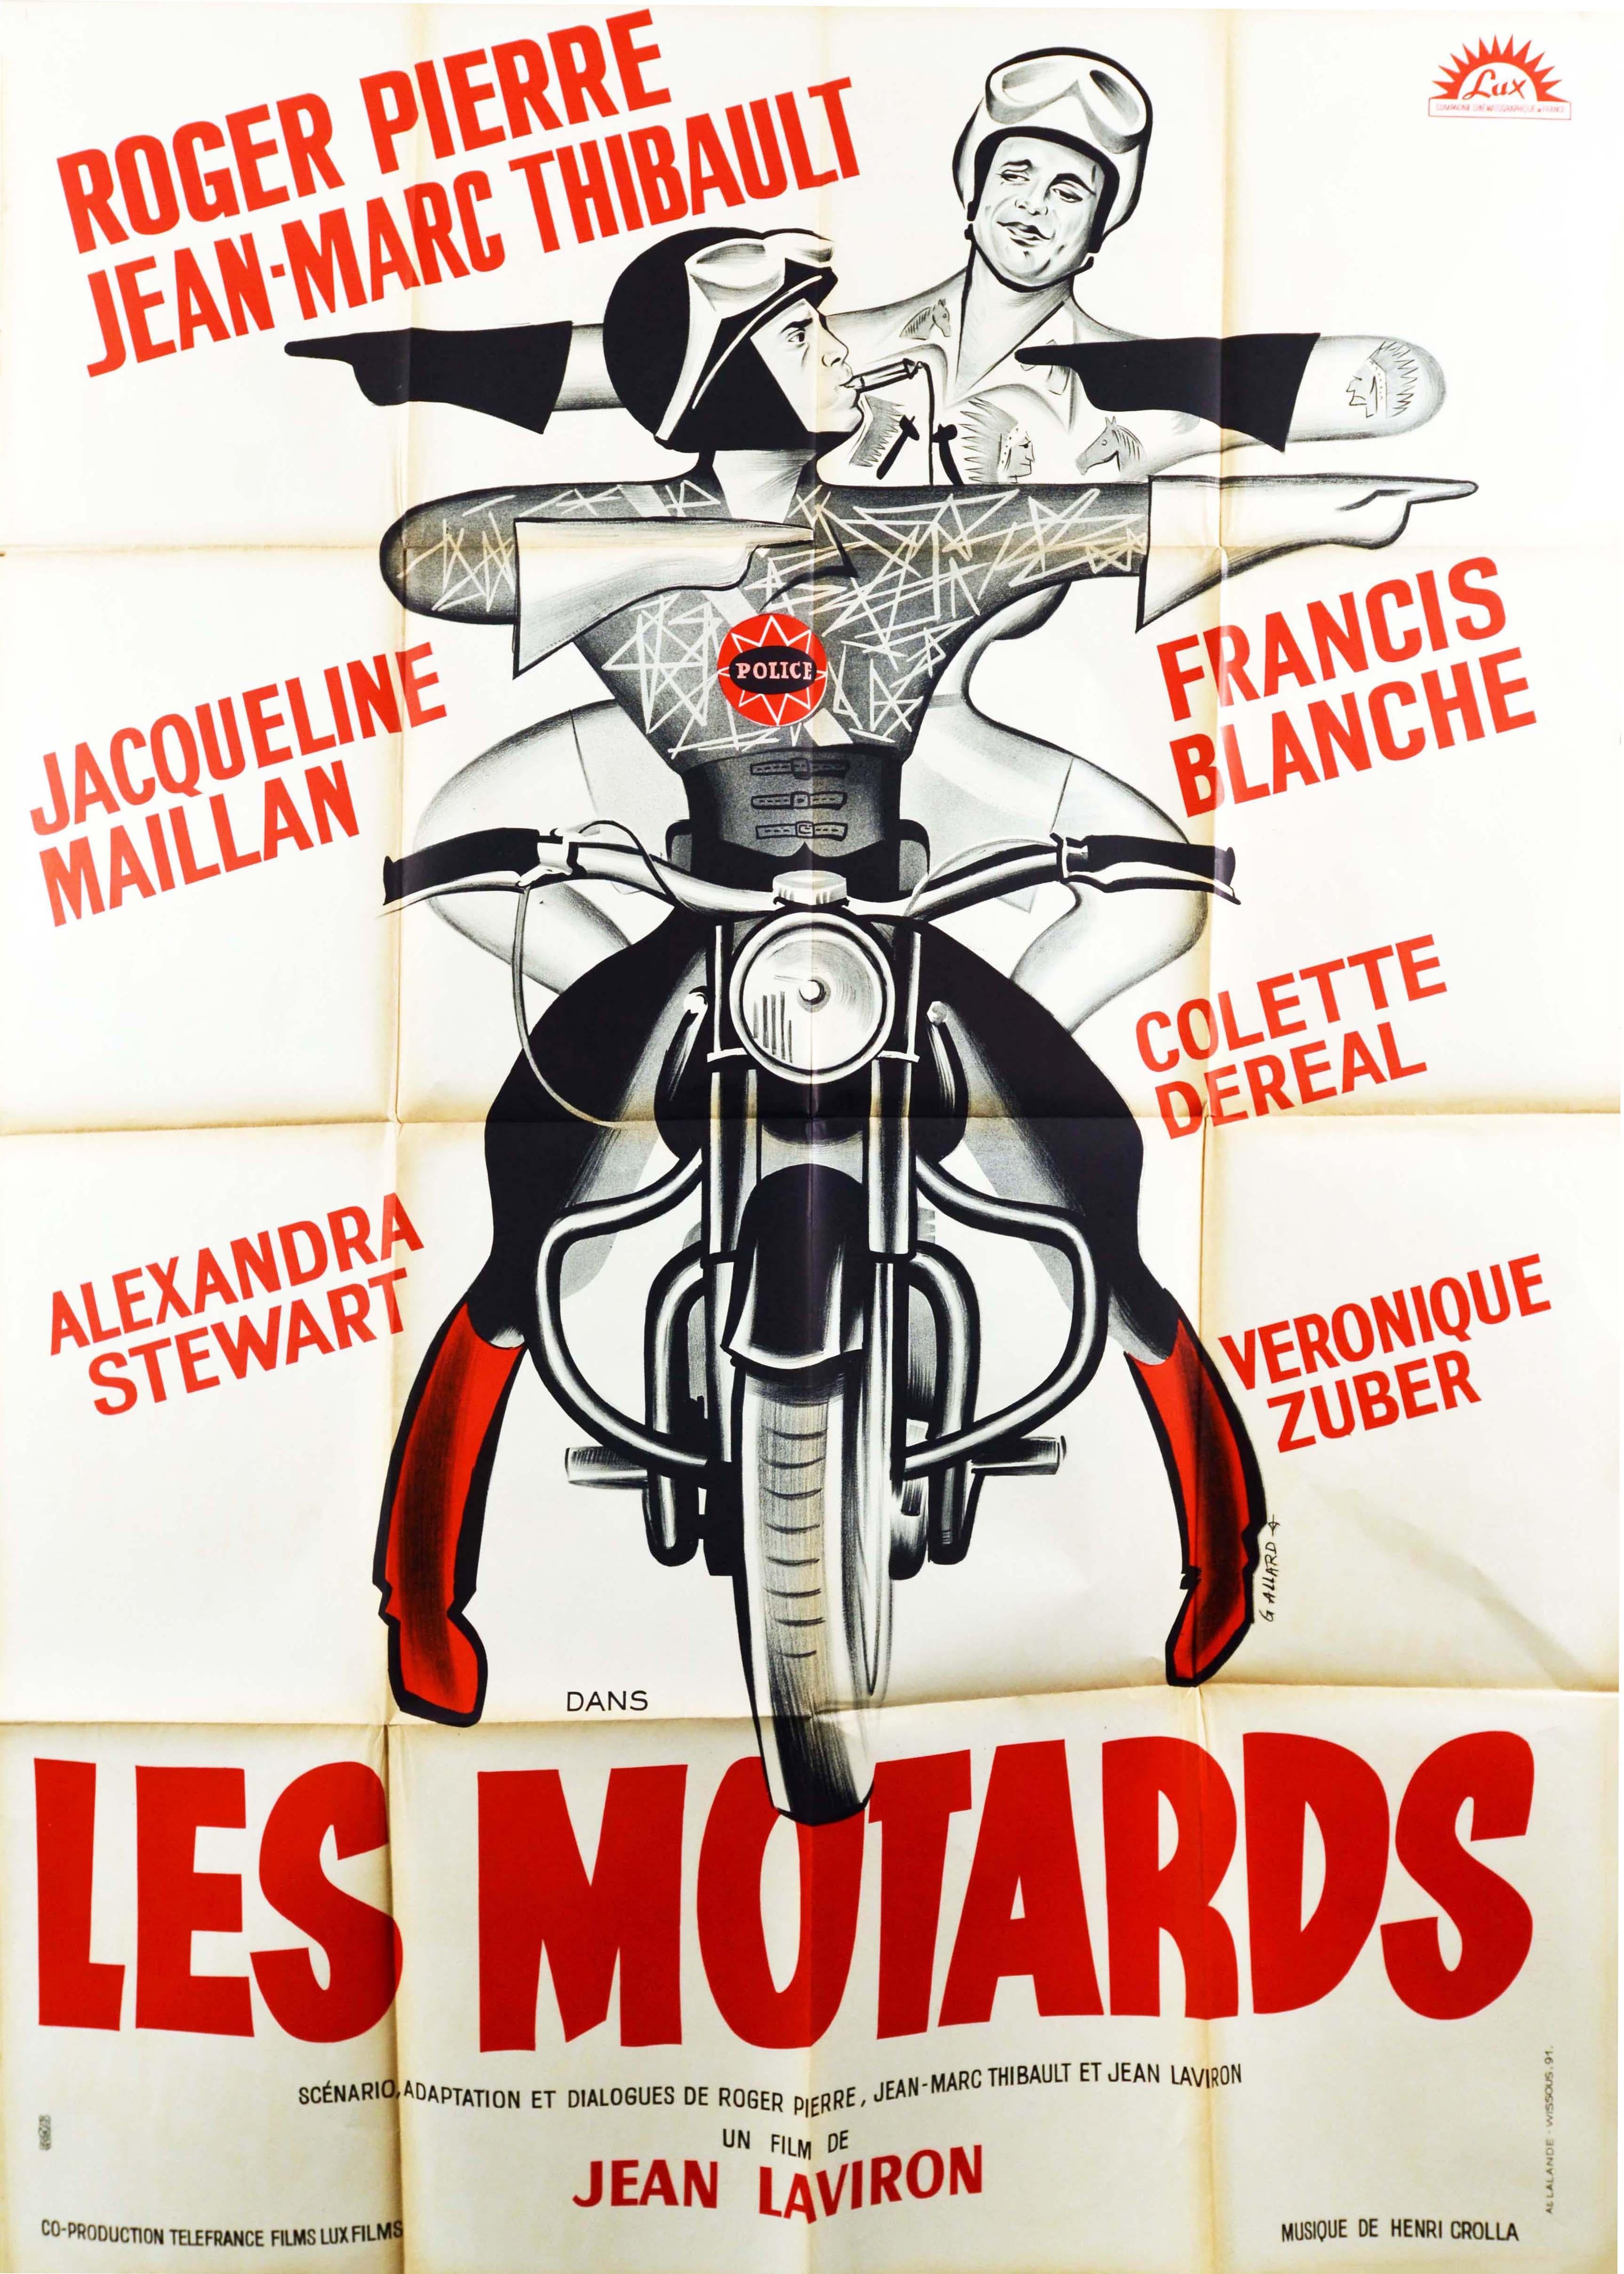 Gallard Print - Original Vintage Movie Poster Les Motards The Motorcycle Cops French Comedy Film